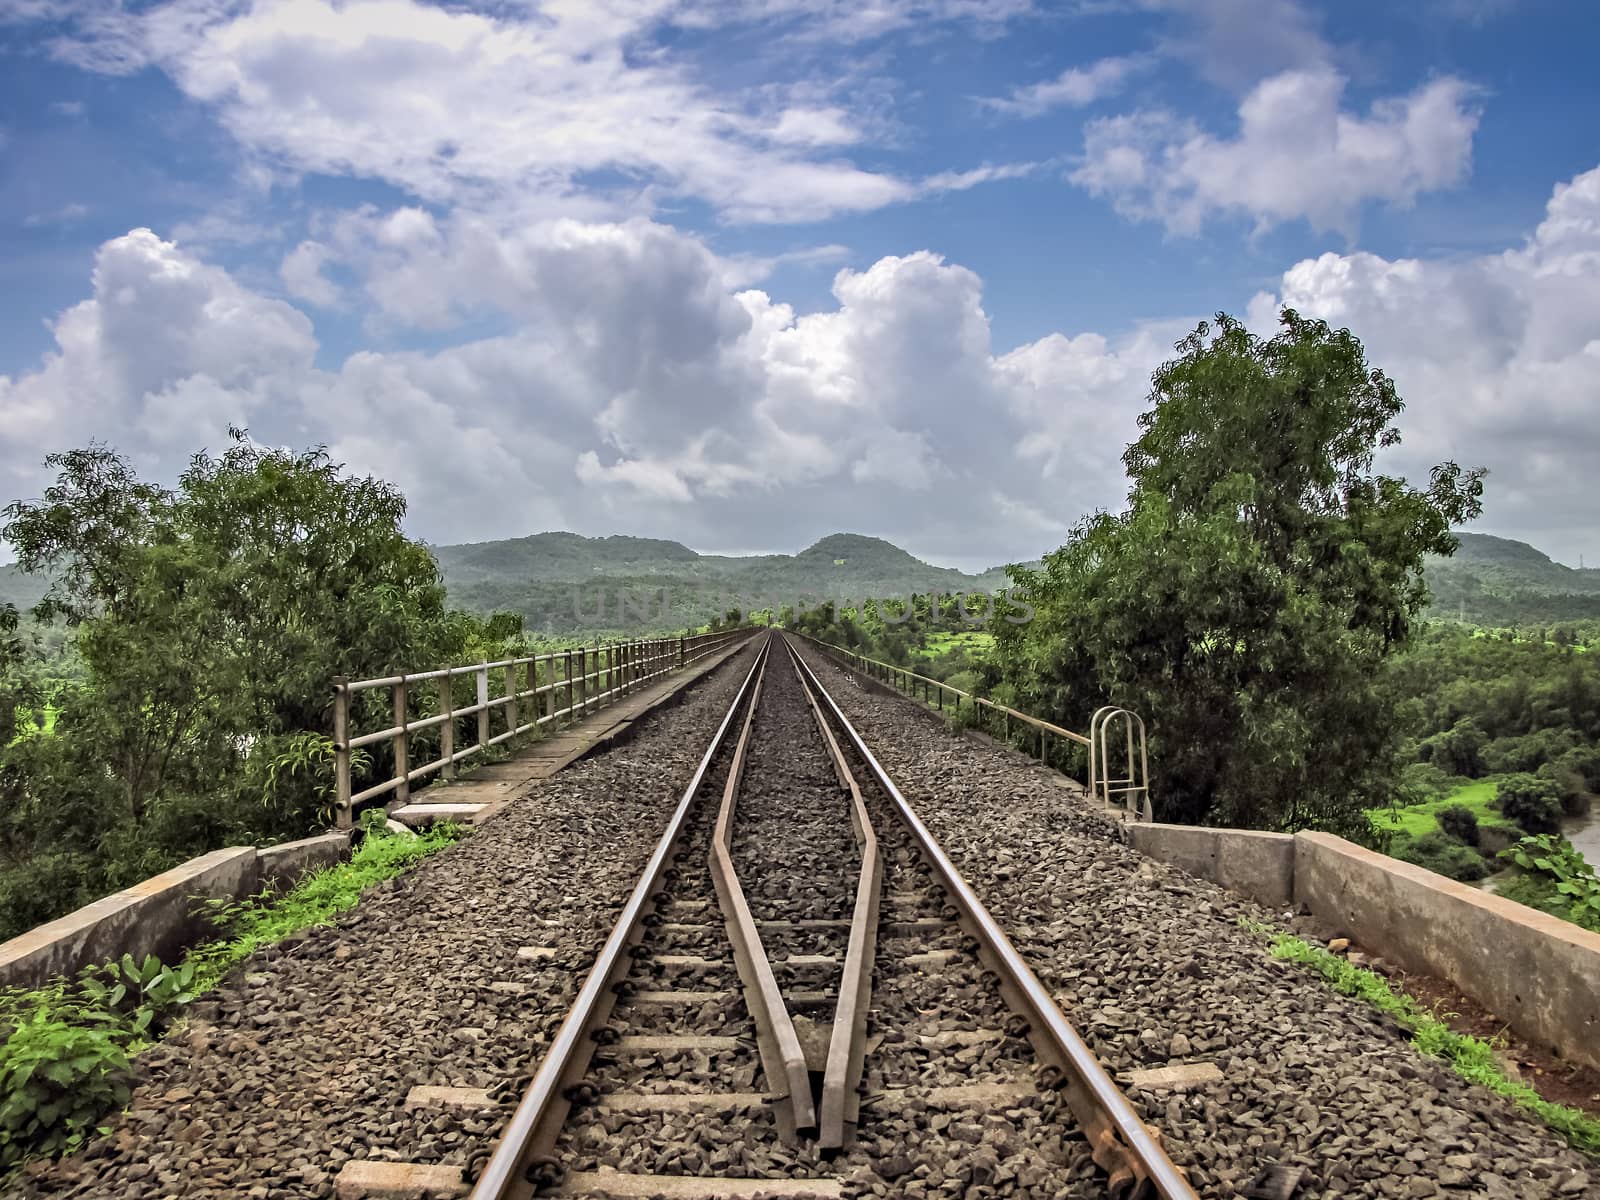 Converging rail track over bridge with nice blue sky and clouds background. by lalam